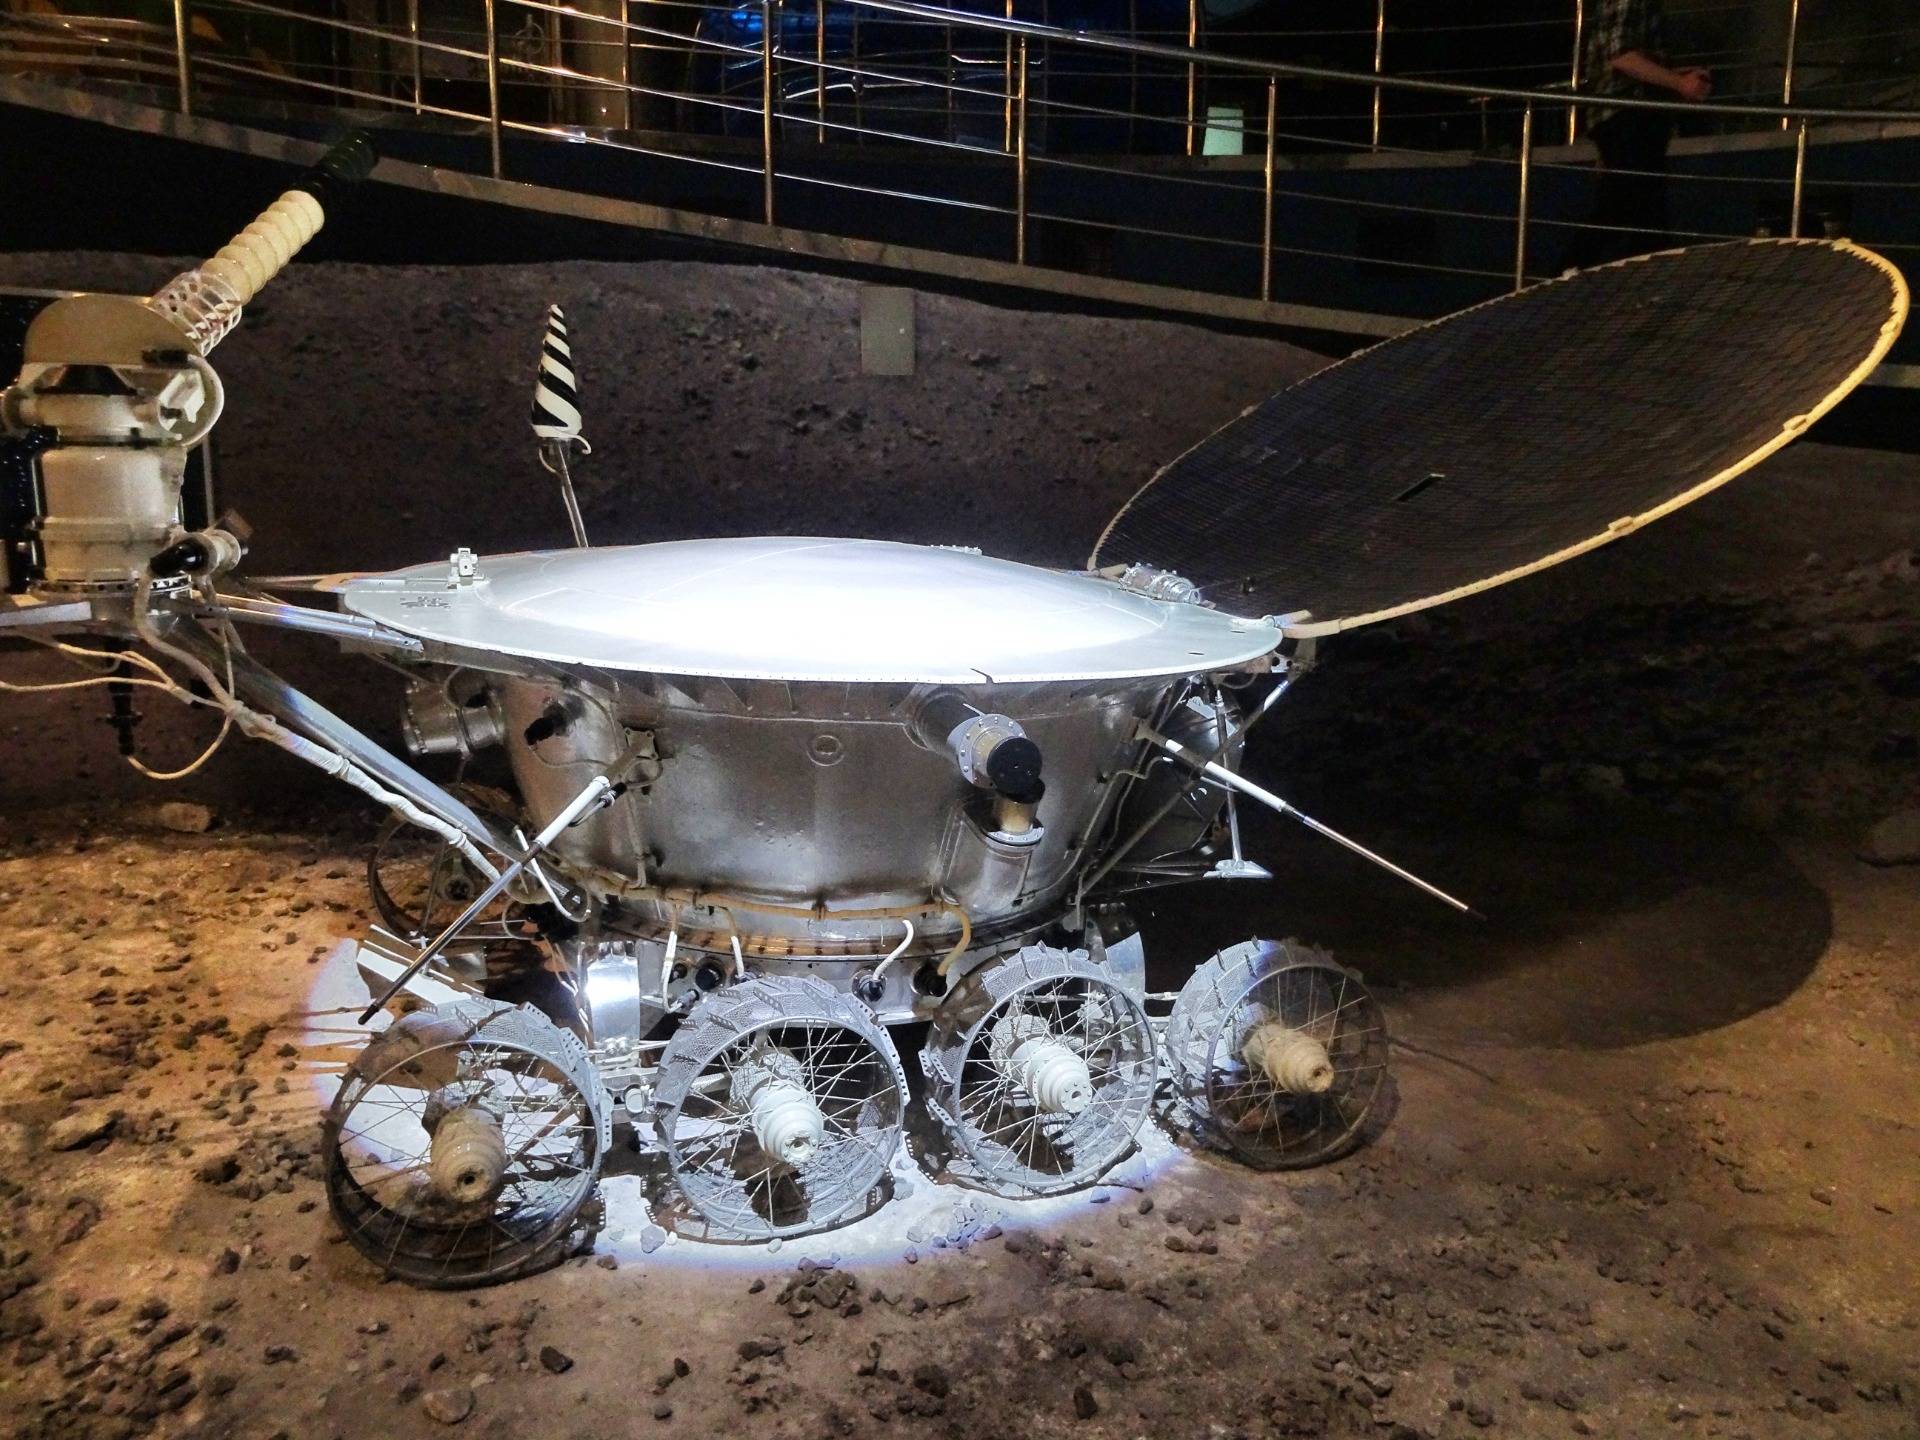 Lunochod (”Moonwalk”), the very early russian moon rover